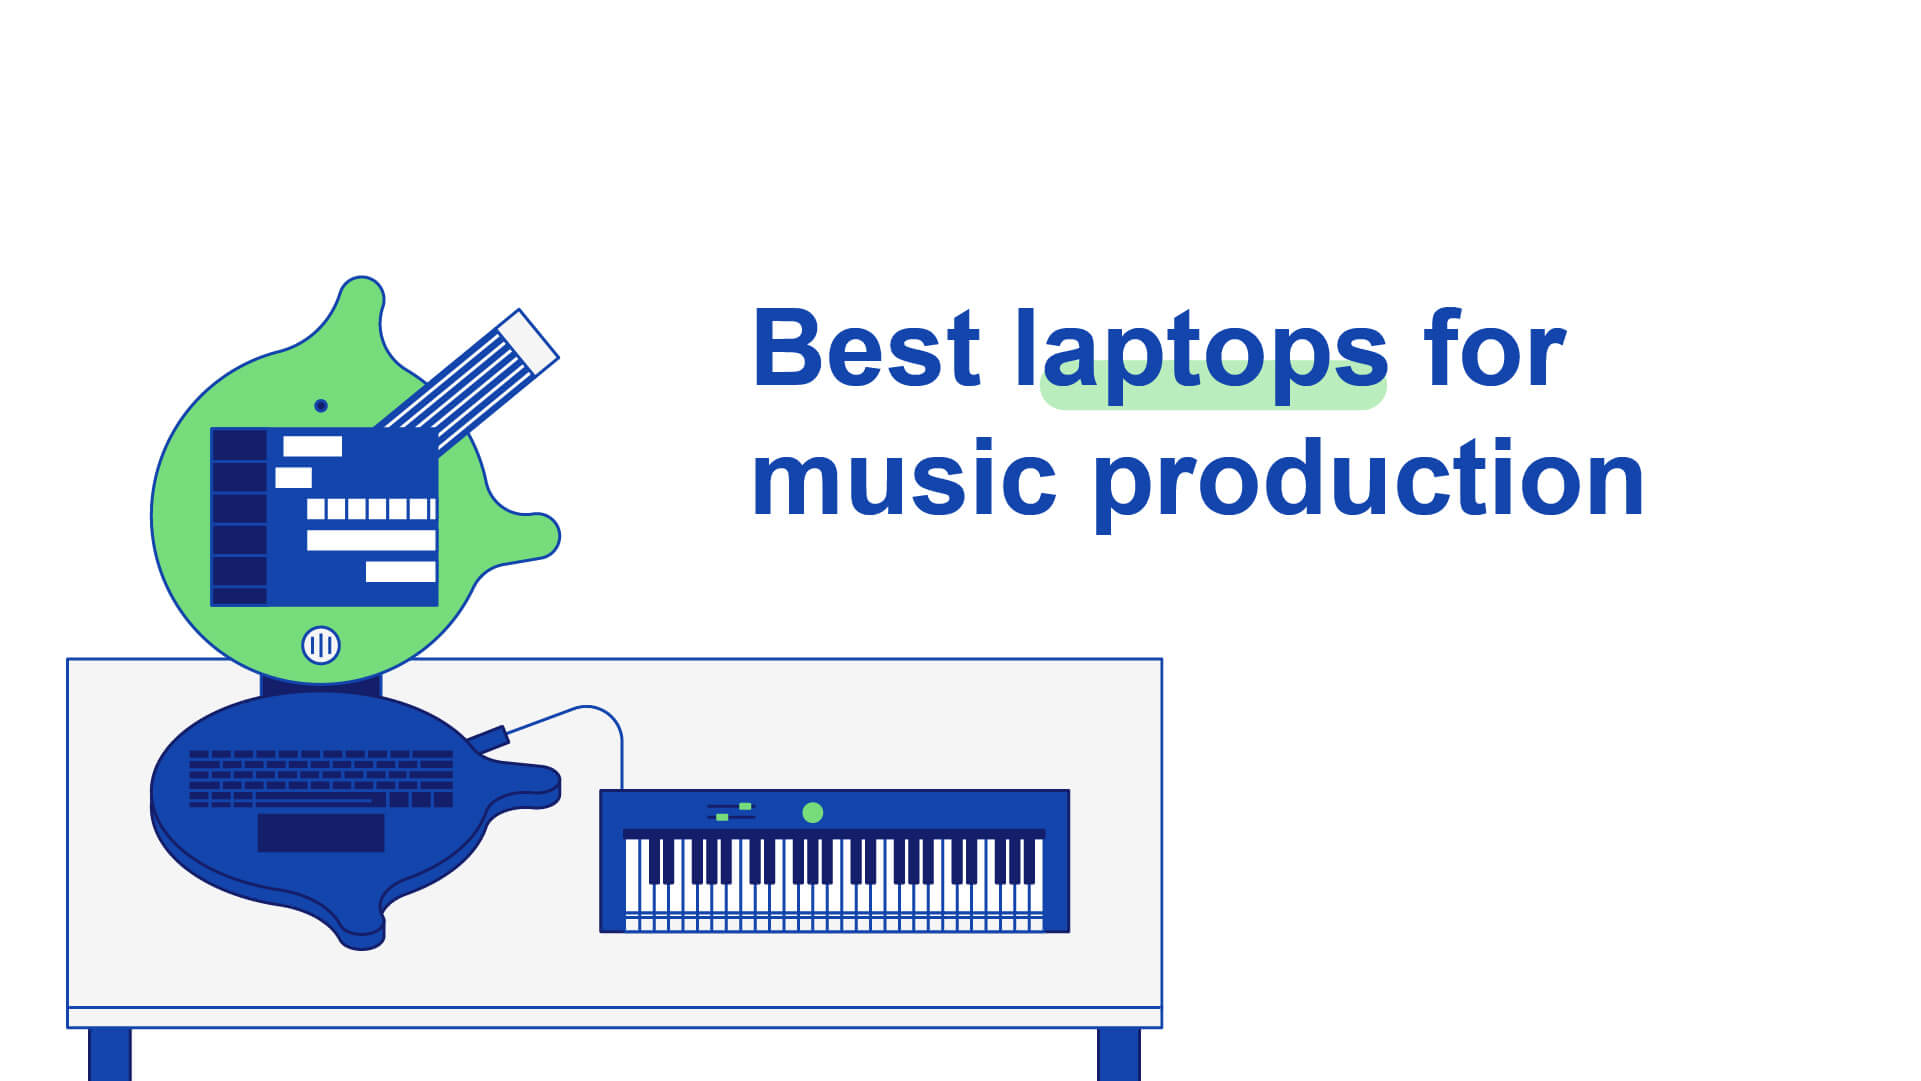 Best laptops for music production for mobile music makers and professionals